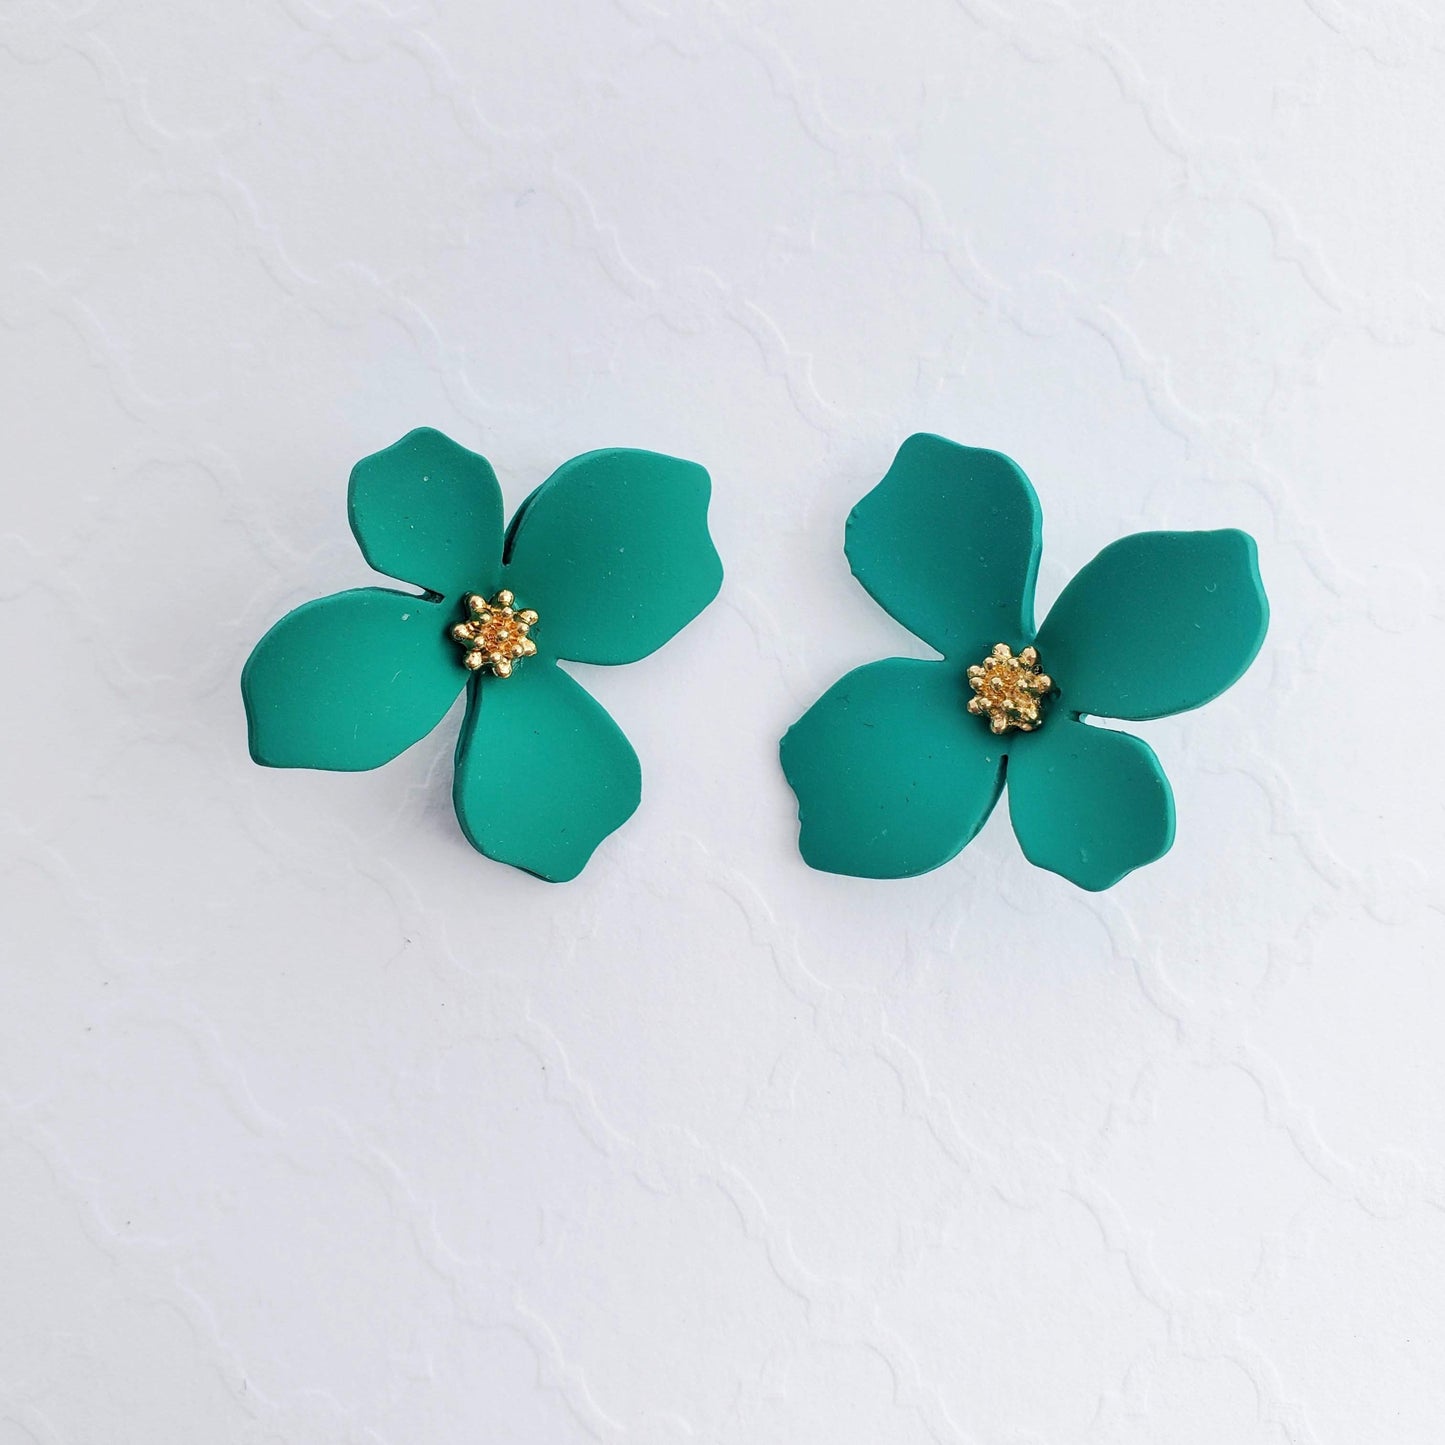 In Bloom Earring Collection-Trendi737 Jewelry Boutique-earrings,flower earrings,green,green earrings,green flower earring,green flower stud,In Bloom earrings,Summer earrings,summer jewelry,yellow,yellow earrings,yellow flower earring,yellow flower stud